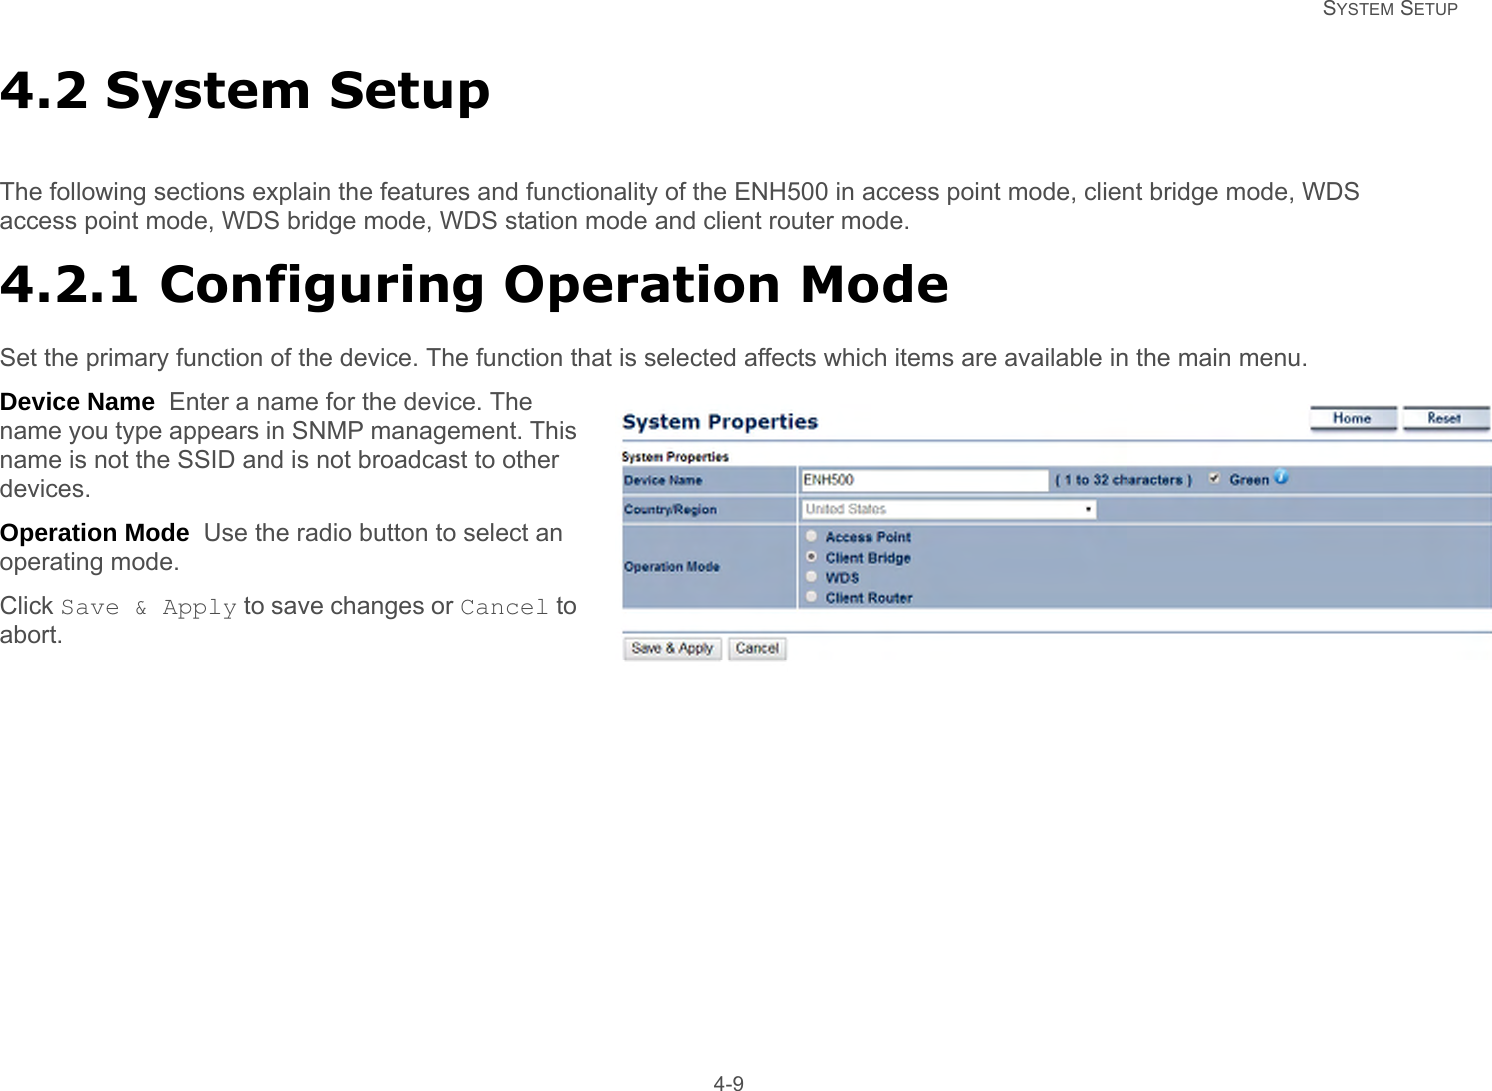   SYSTEM SETUP 4-94.2 System SetupThe following sections explain the features and functionality of the ENH500 in access point mode, client bridge mode, WDS access point mode, WDS bridge mode, WDS station mode and client router mode.4.2.1 Configuring Operation ModeSet the primary function of the device. The function that is selected affects which items are available in the main menu.Device Name  Enter a name for the device. The name you type appears in SNMP management. This name is not the SSID and is not broadcast to other devices.Operation Mode  Use the radio button to select an operating mode.Click Save &amp; Apply to save changes or Cancel to abort.